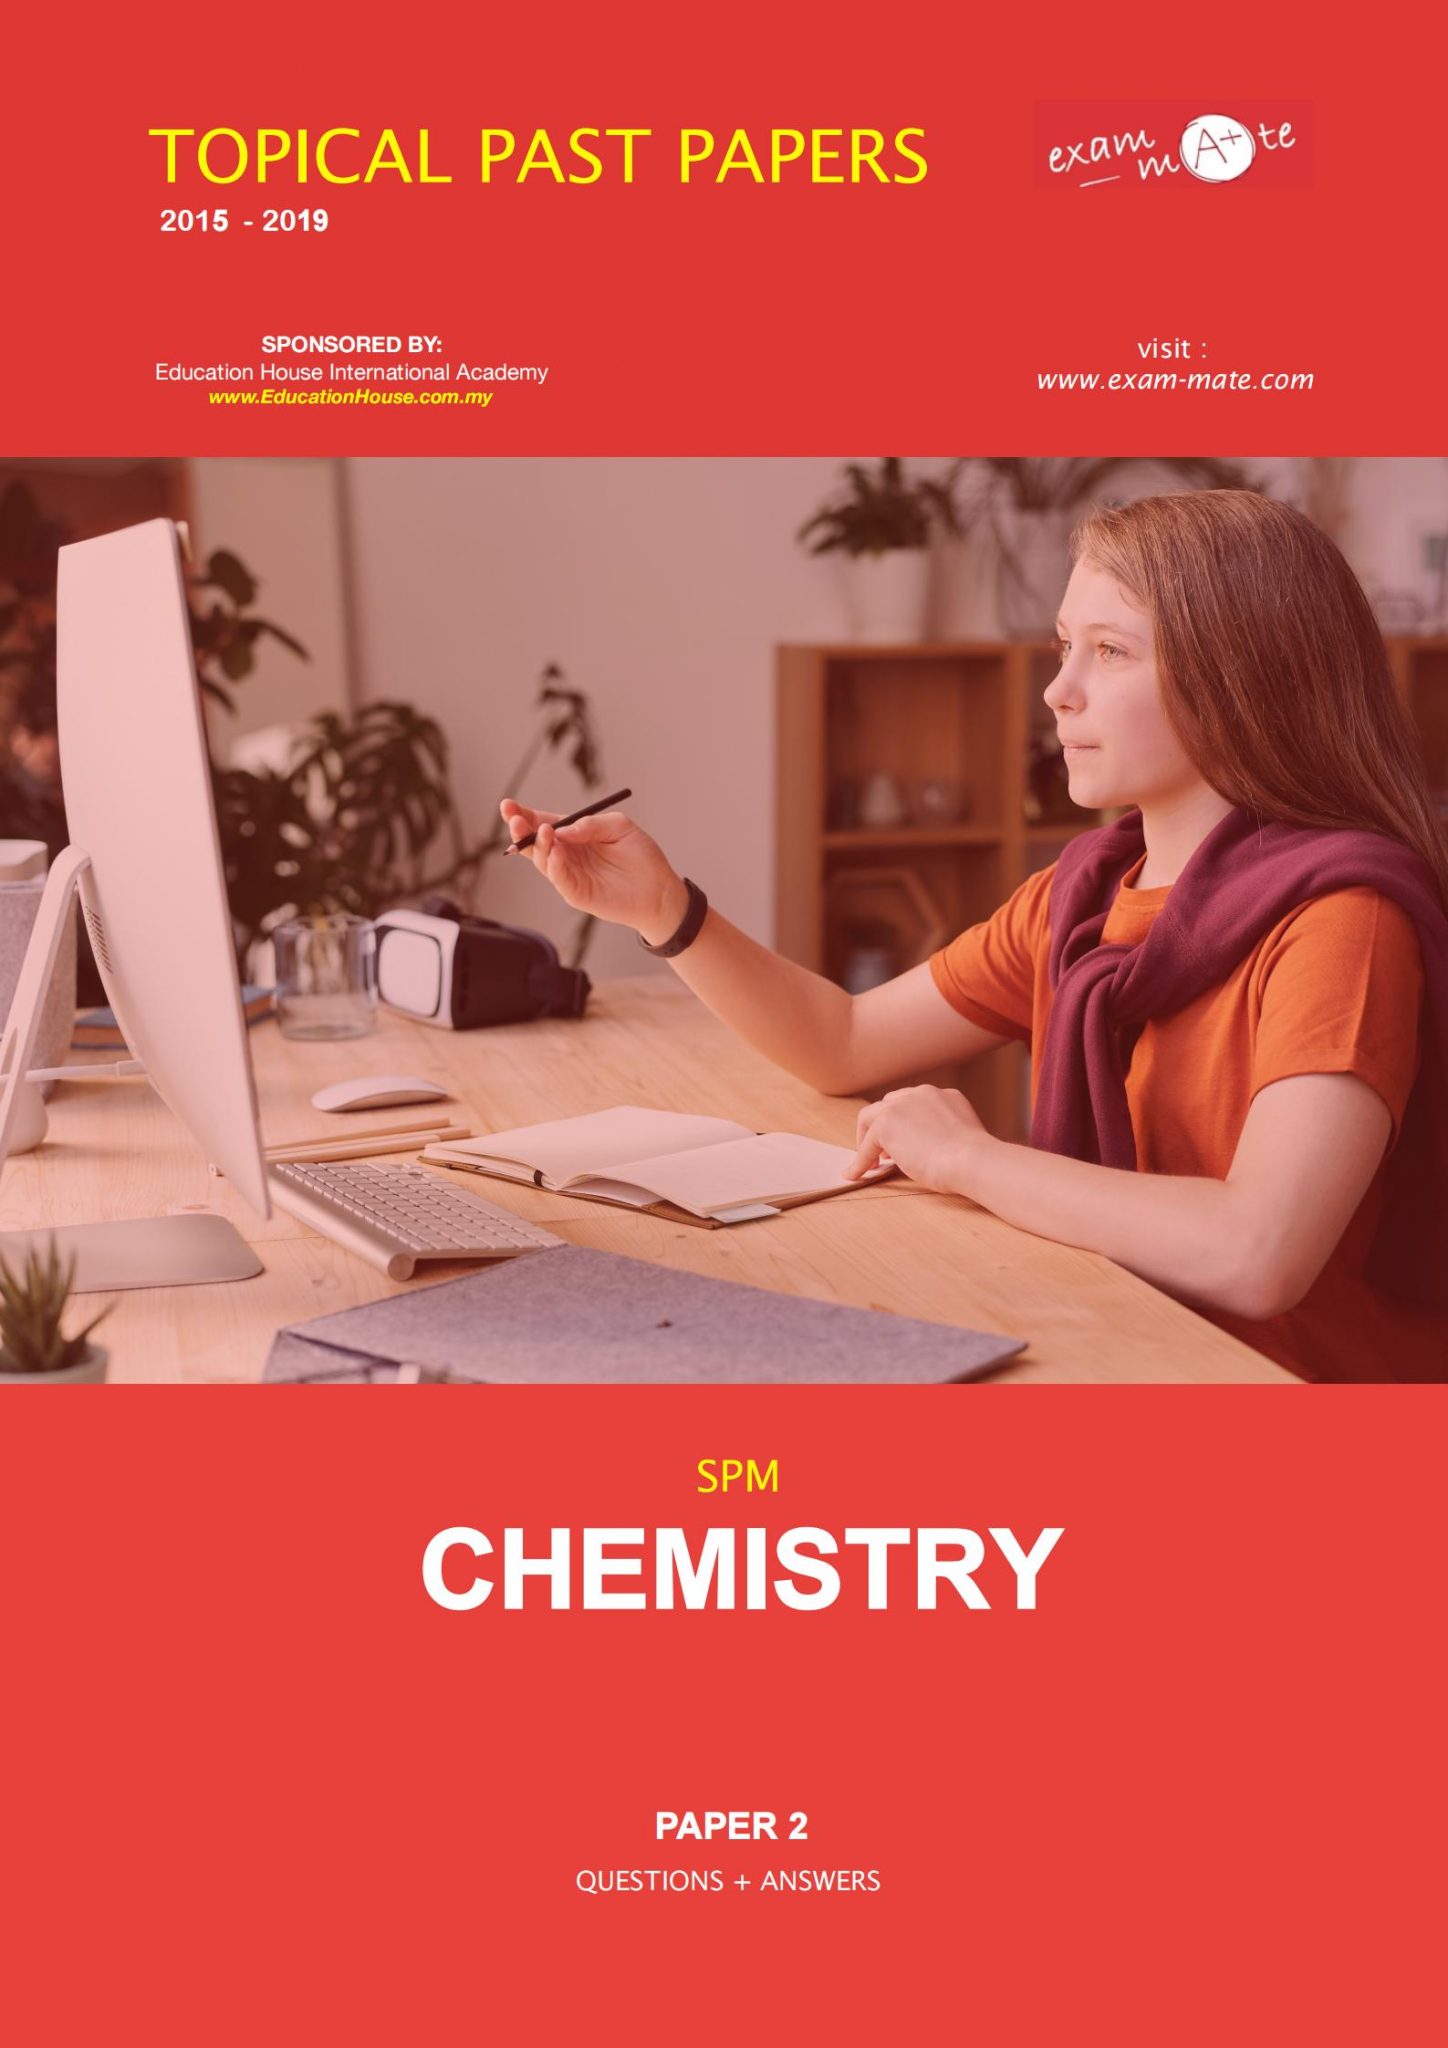 spm chemistry essay collection